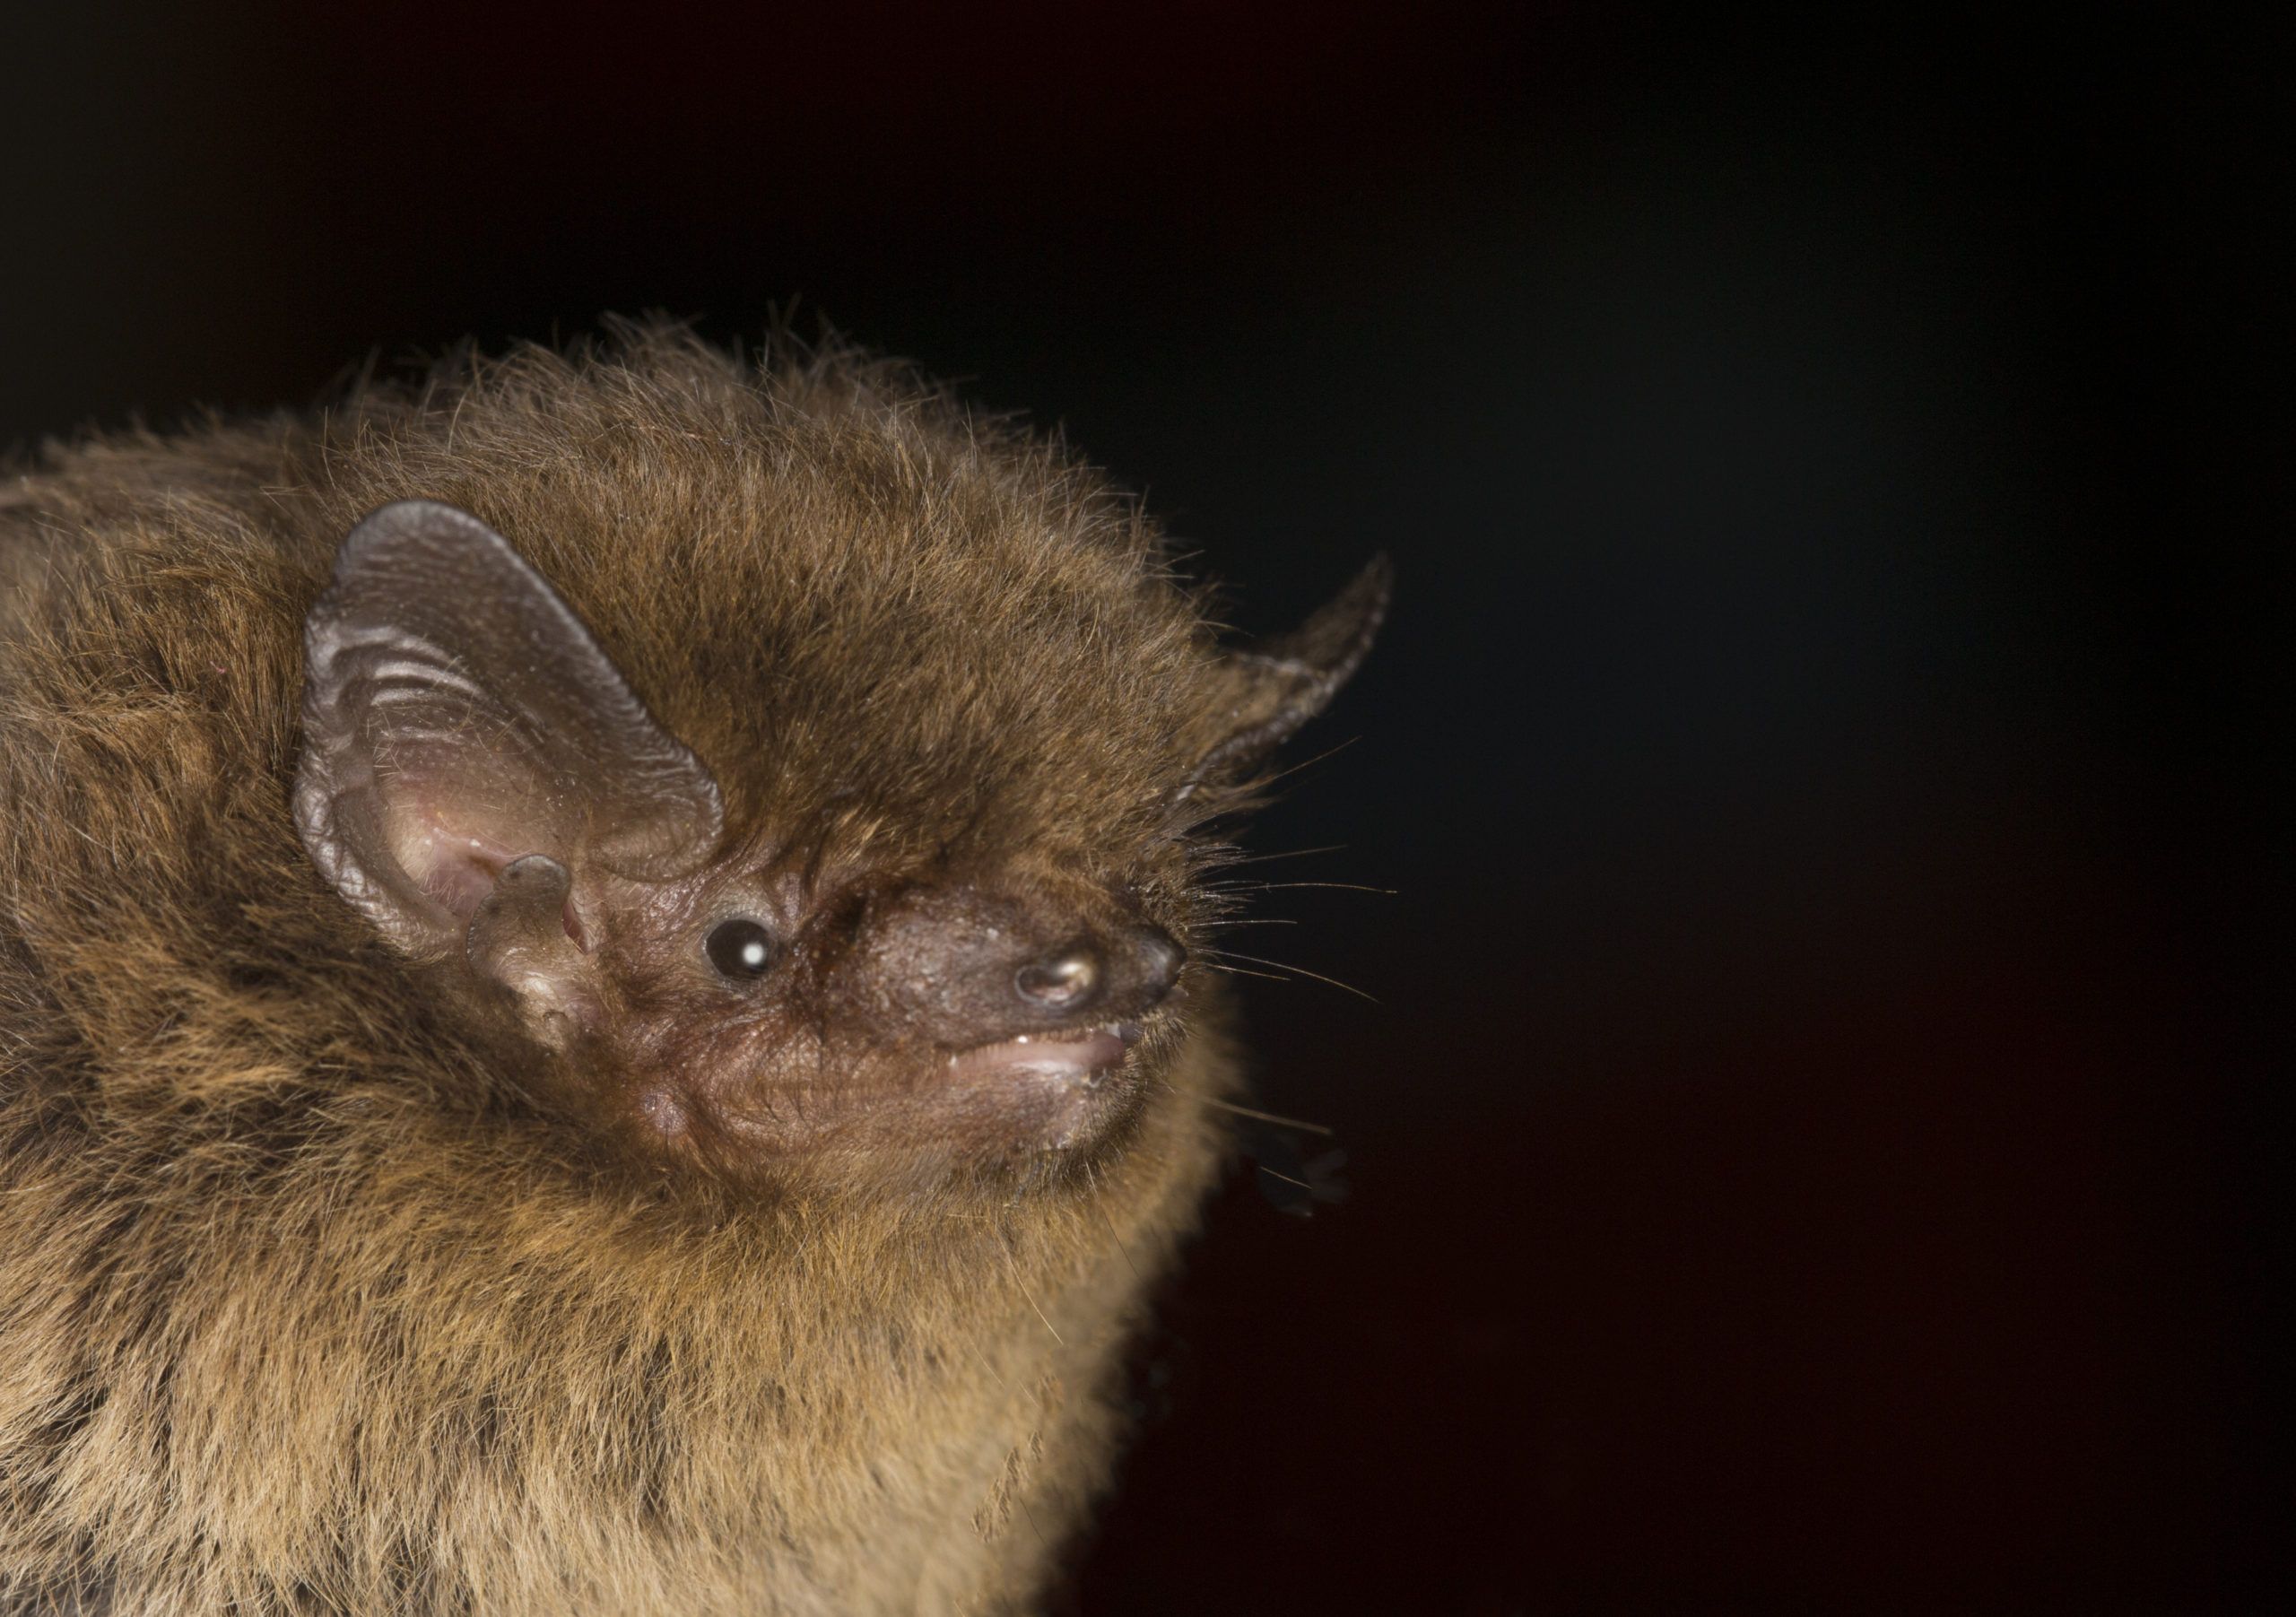 Profile image of a Nathusius Pipistrelle. The bat is in the bootom left of the image and is looking at the camera. Only the head is visible.